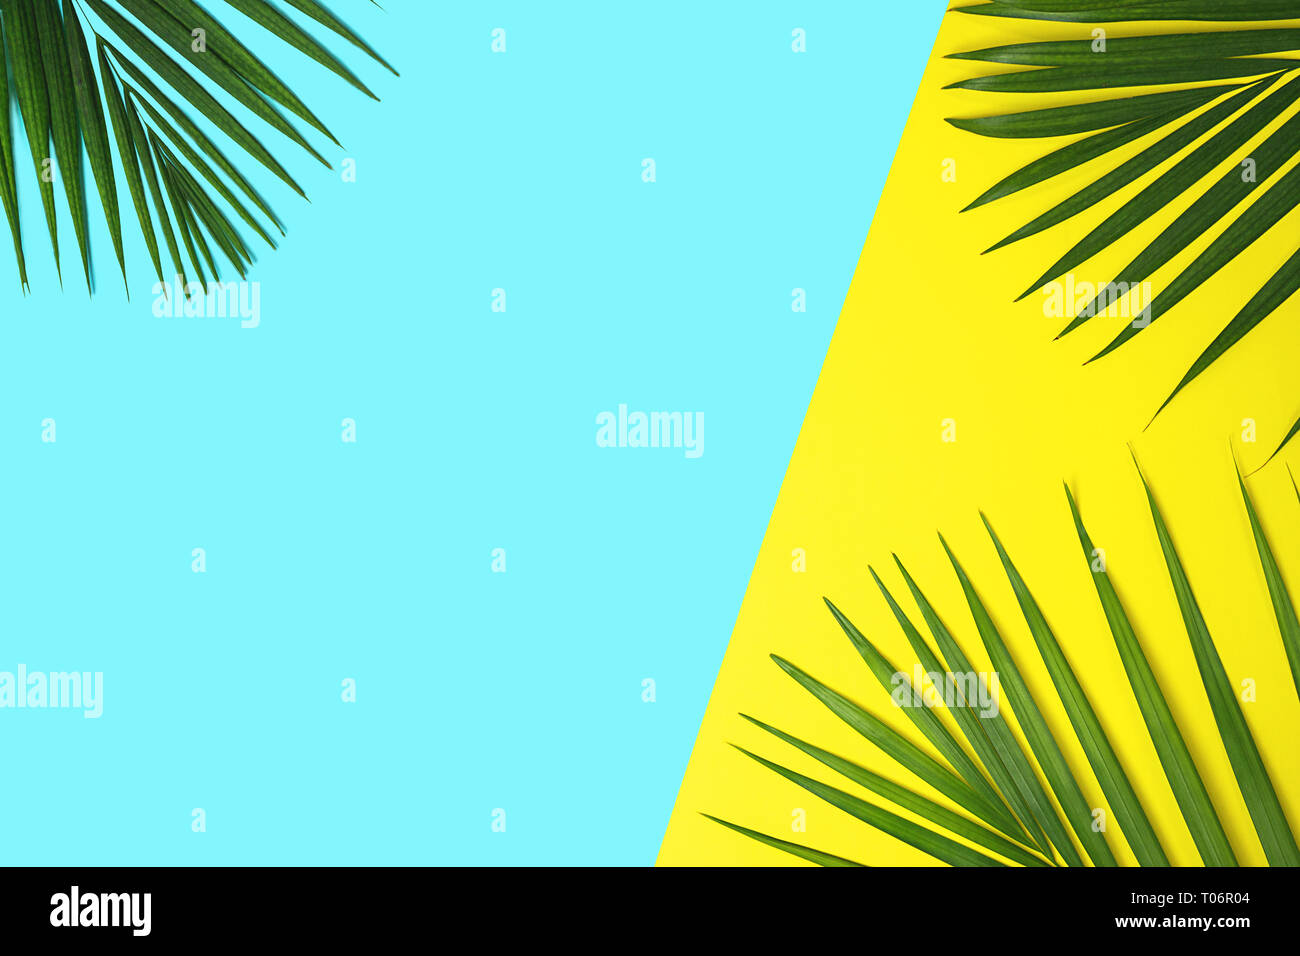 Tropical green palm leaves on colorful background. Yellow and blue colors. Stock Photo